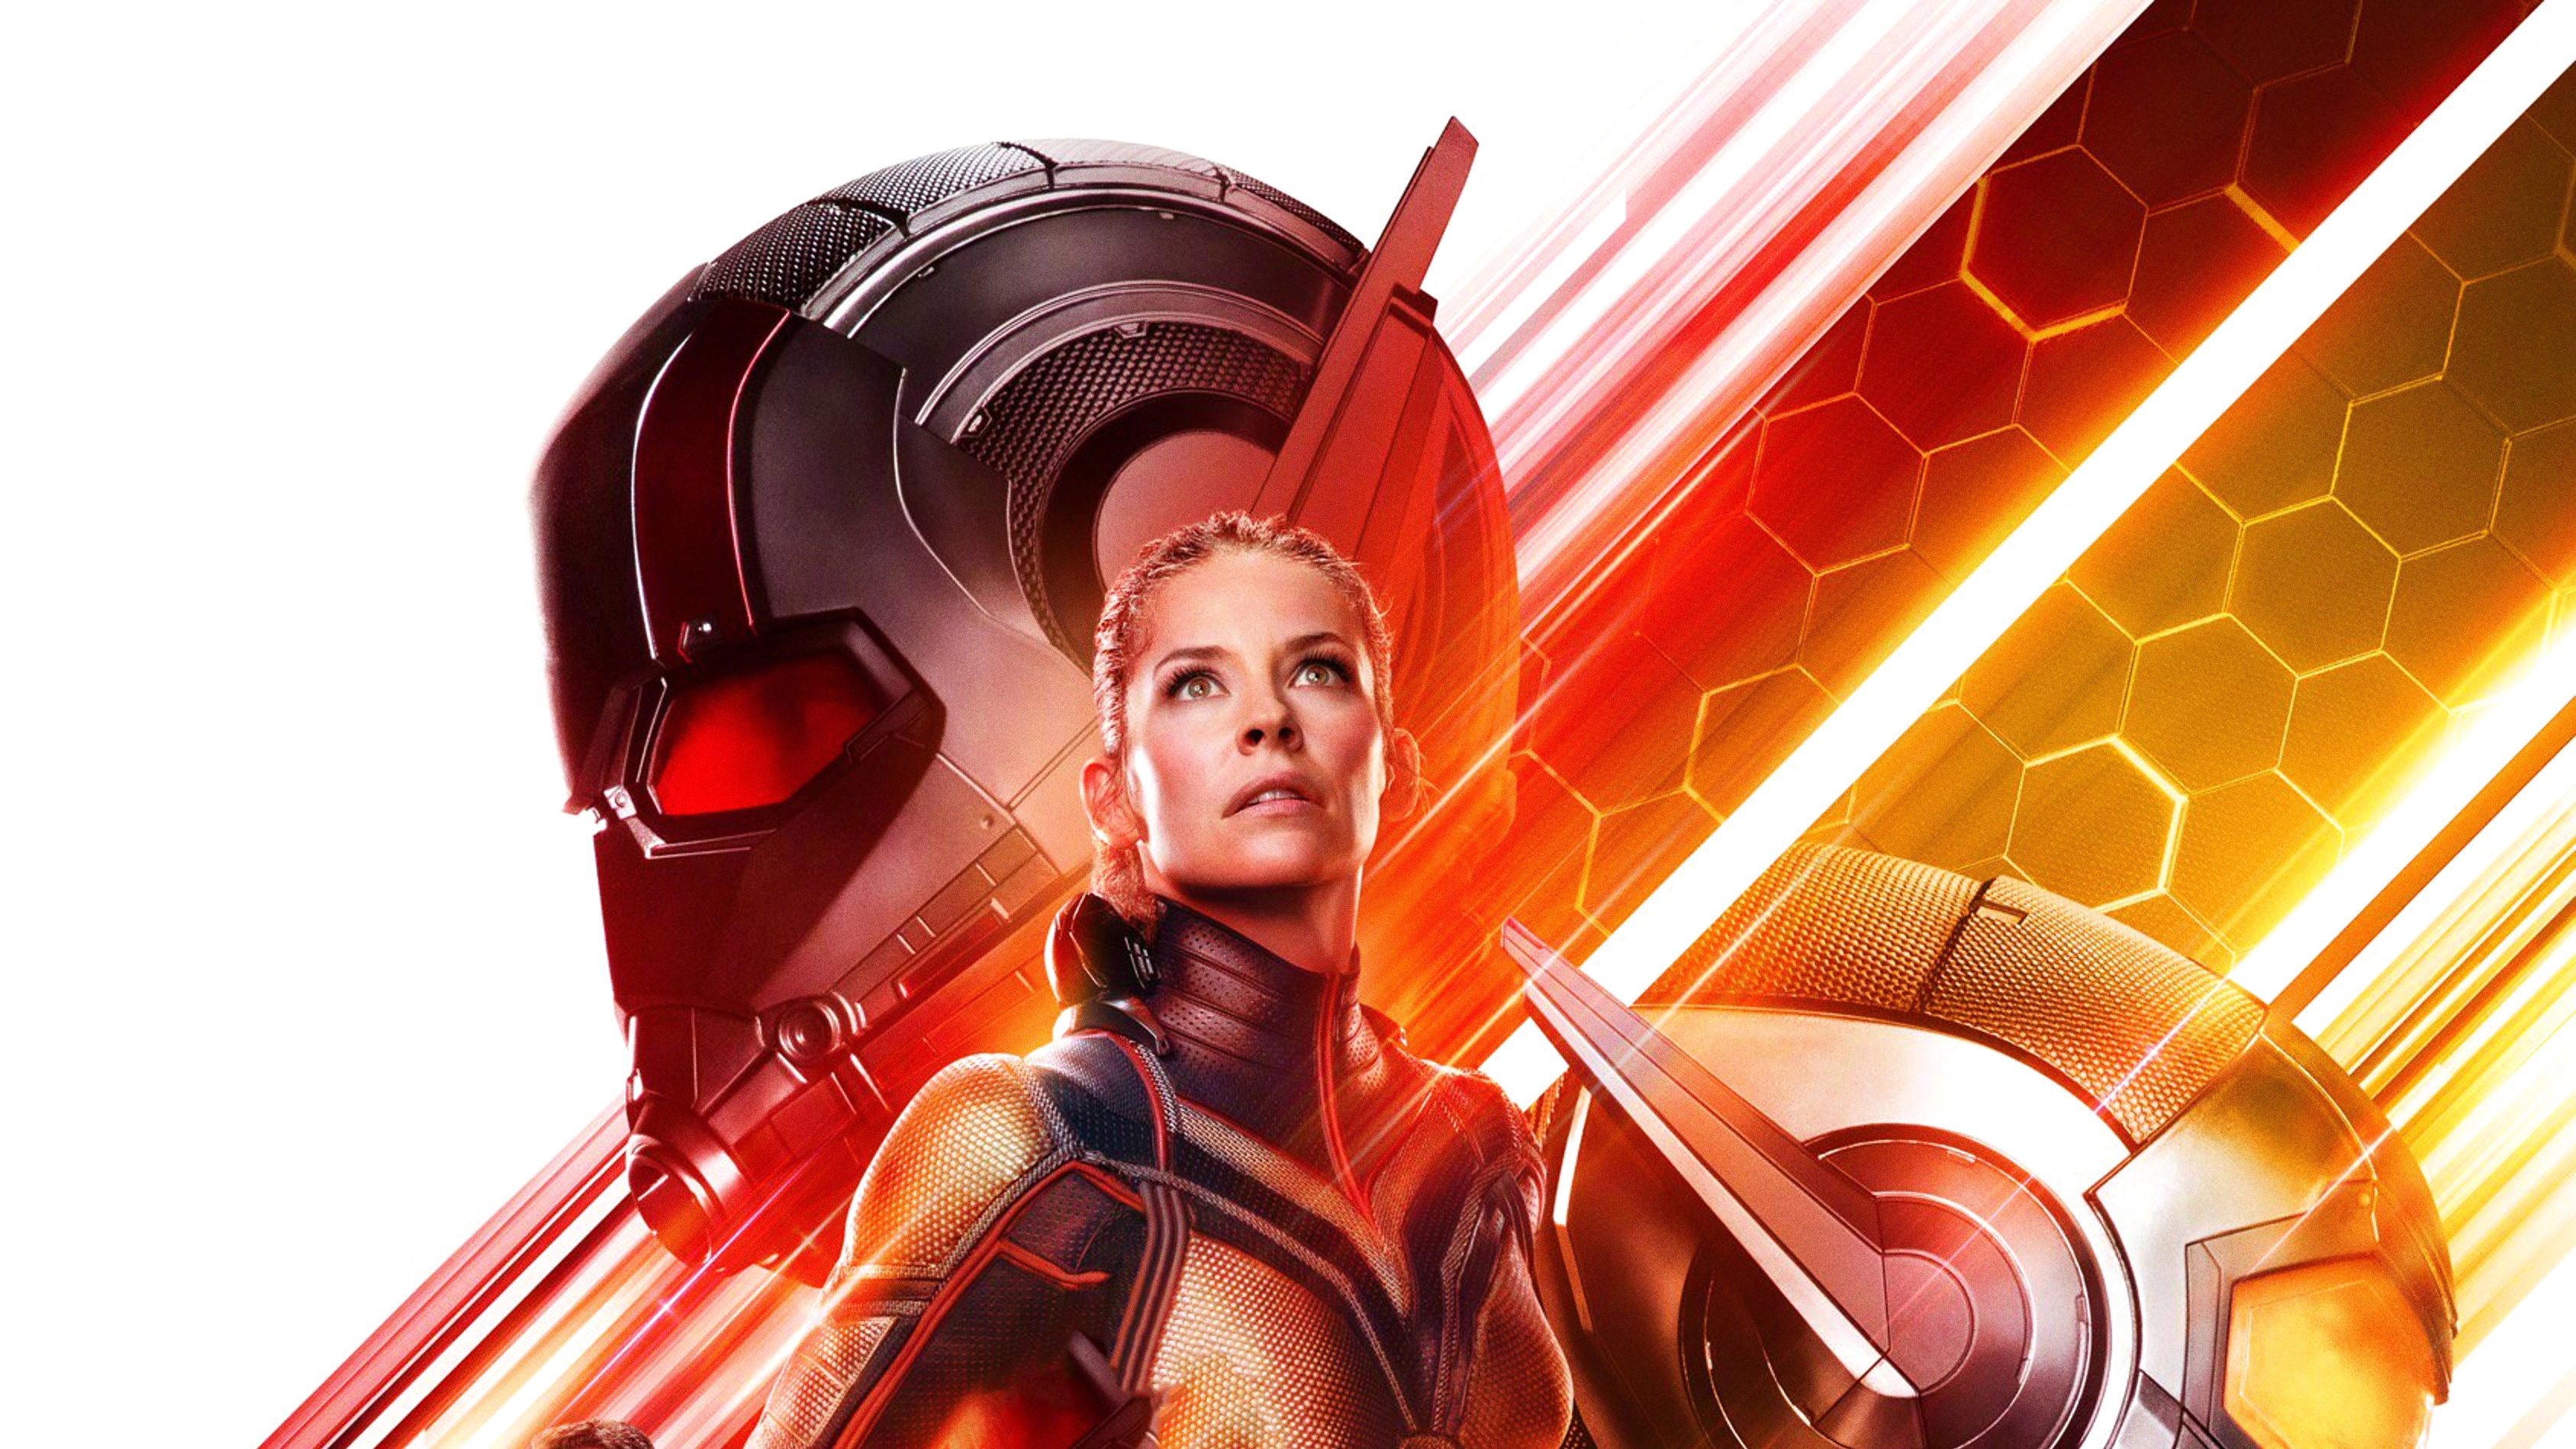 Ant Man Ant Man And The Wasp Evangeline Lilly Hope Pym Wasp Marvel Comics 3376x1899